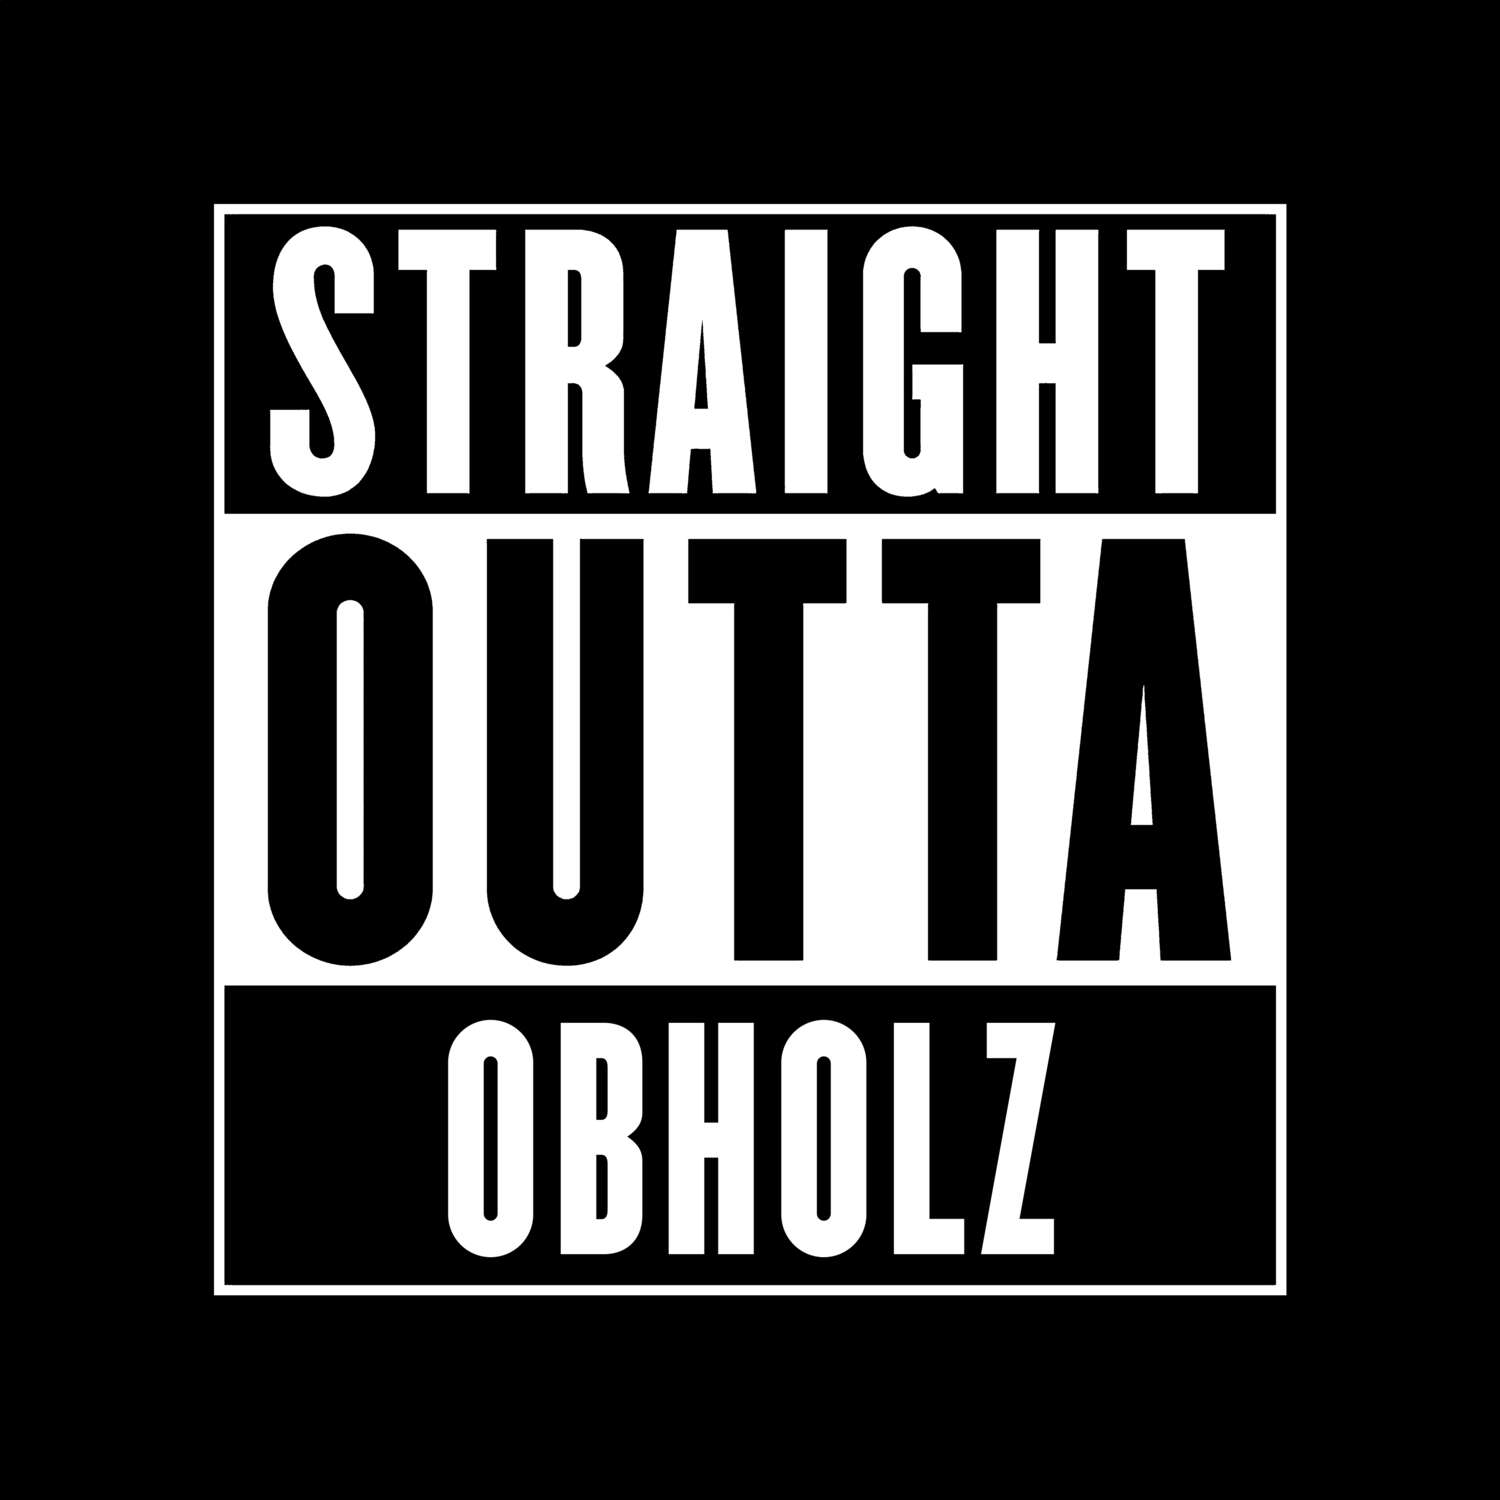 Obholz T-Shirt »Straight Outta«